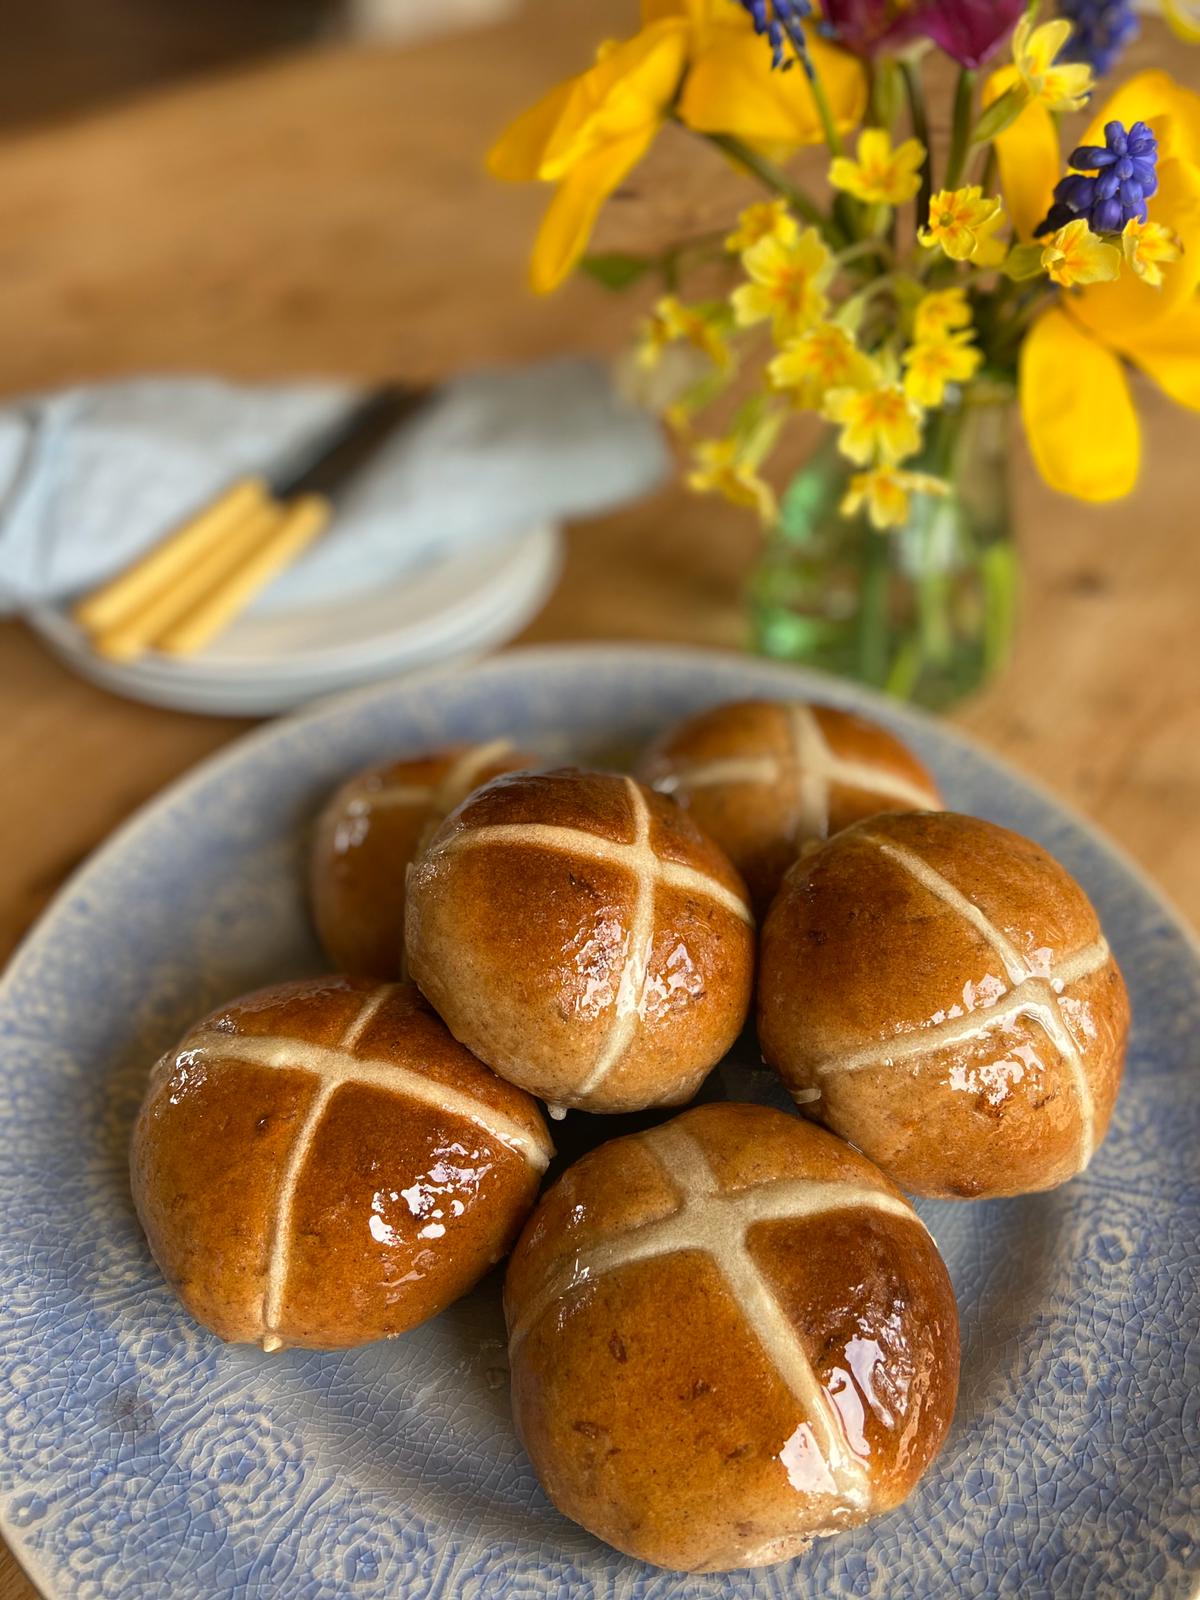 Prue Leith shares her recipe for hot cross buns. 